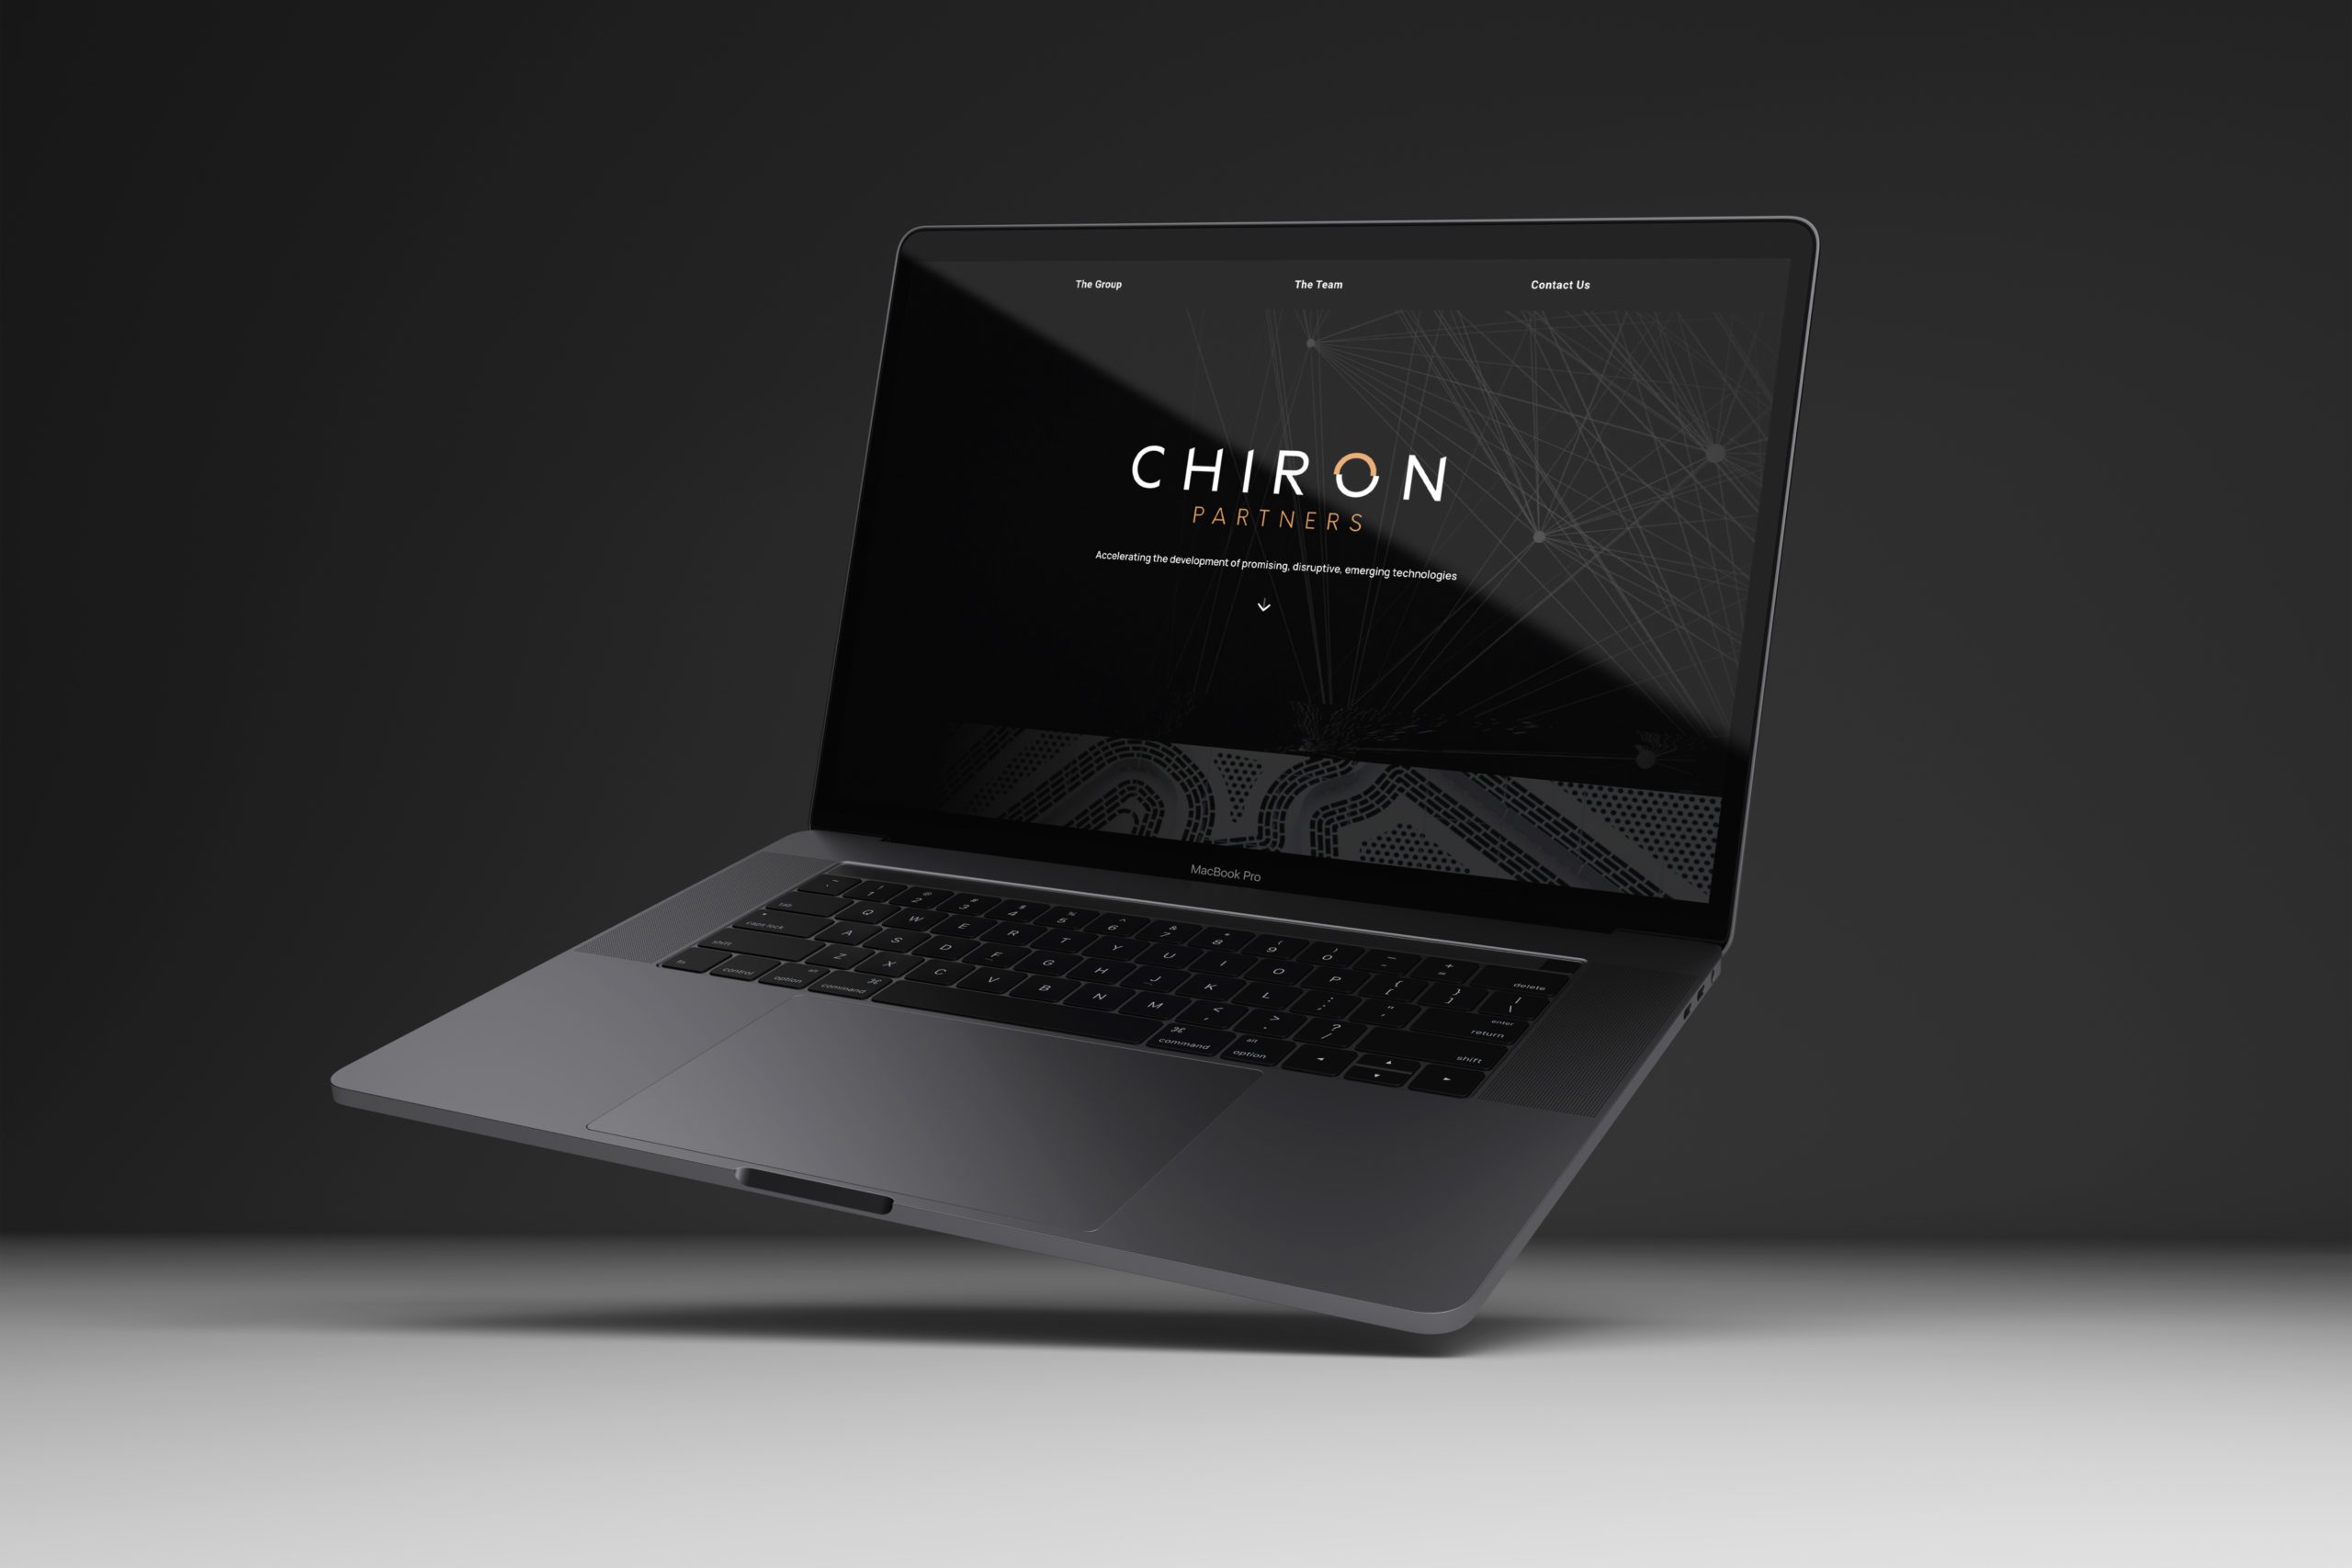 Chiron Partners website shown on laptop with a dark background